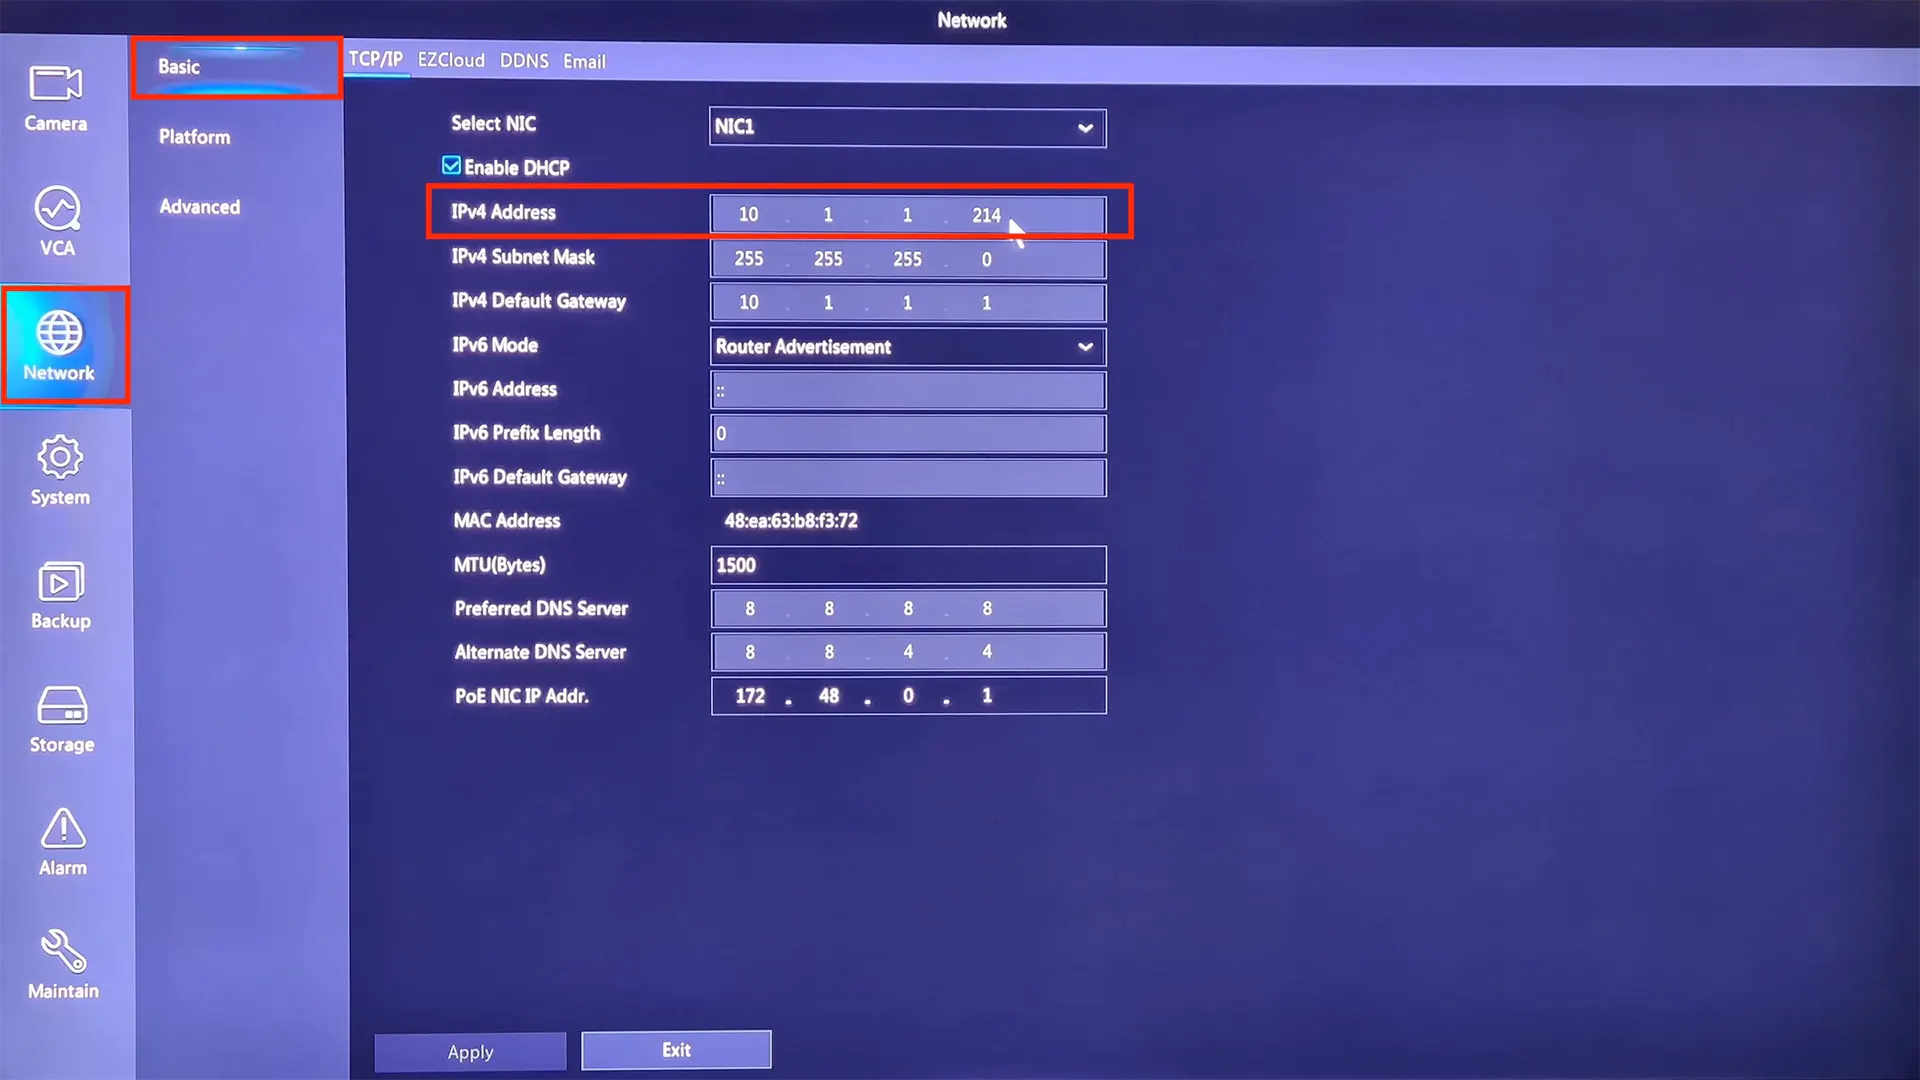 Uniview local NVR network settings from monitor